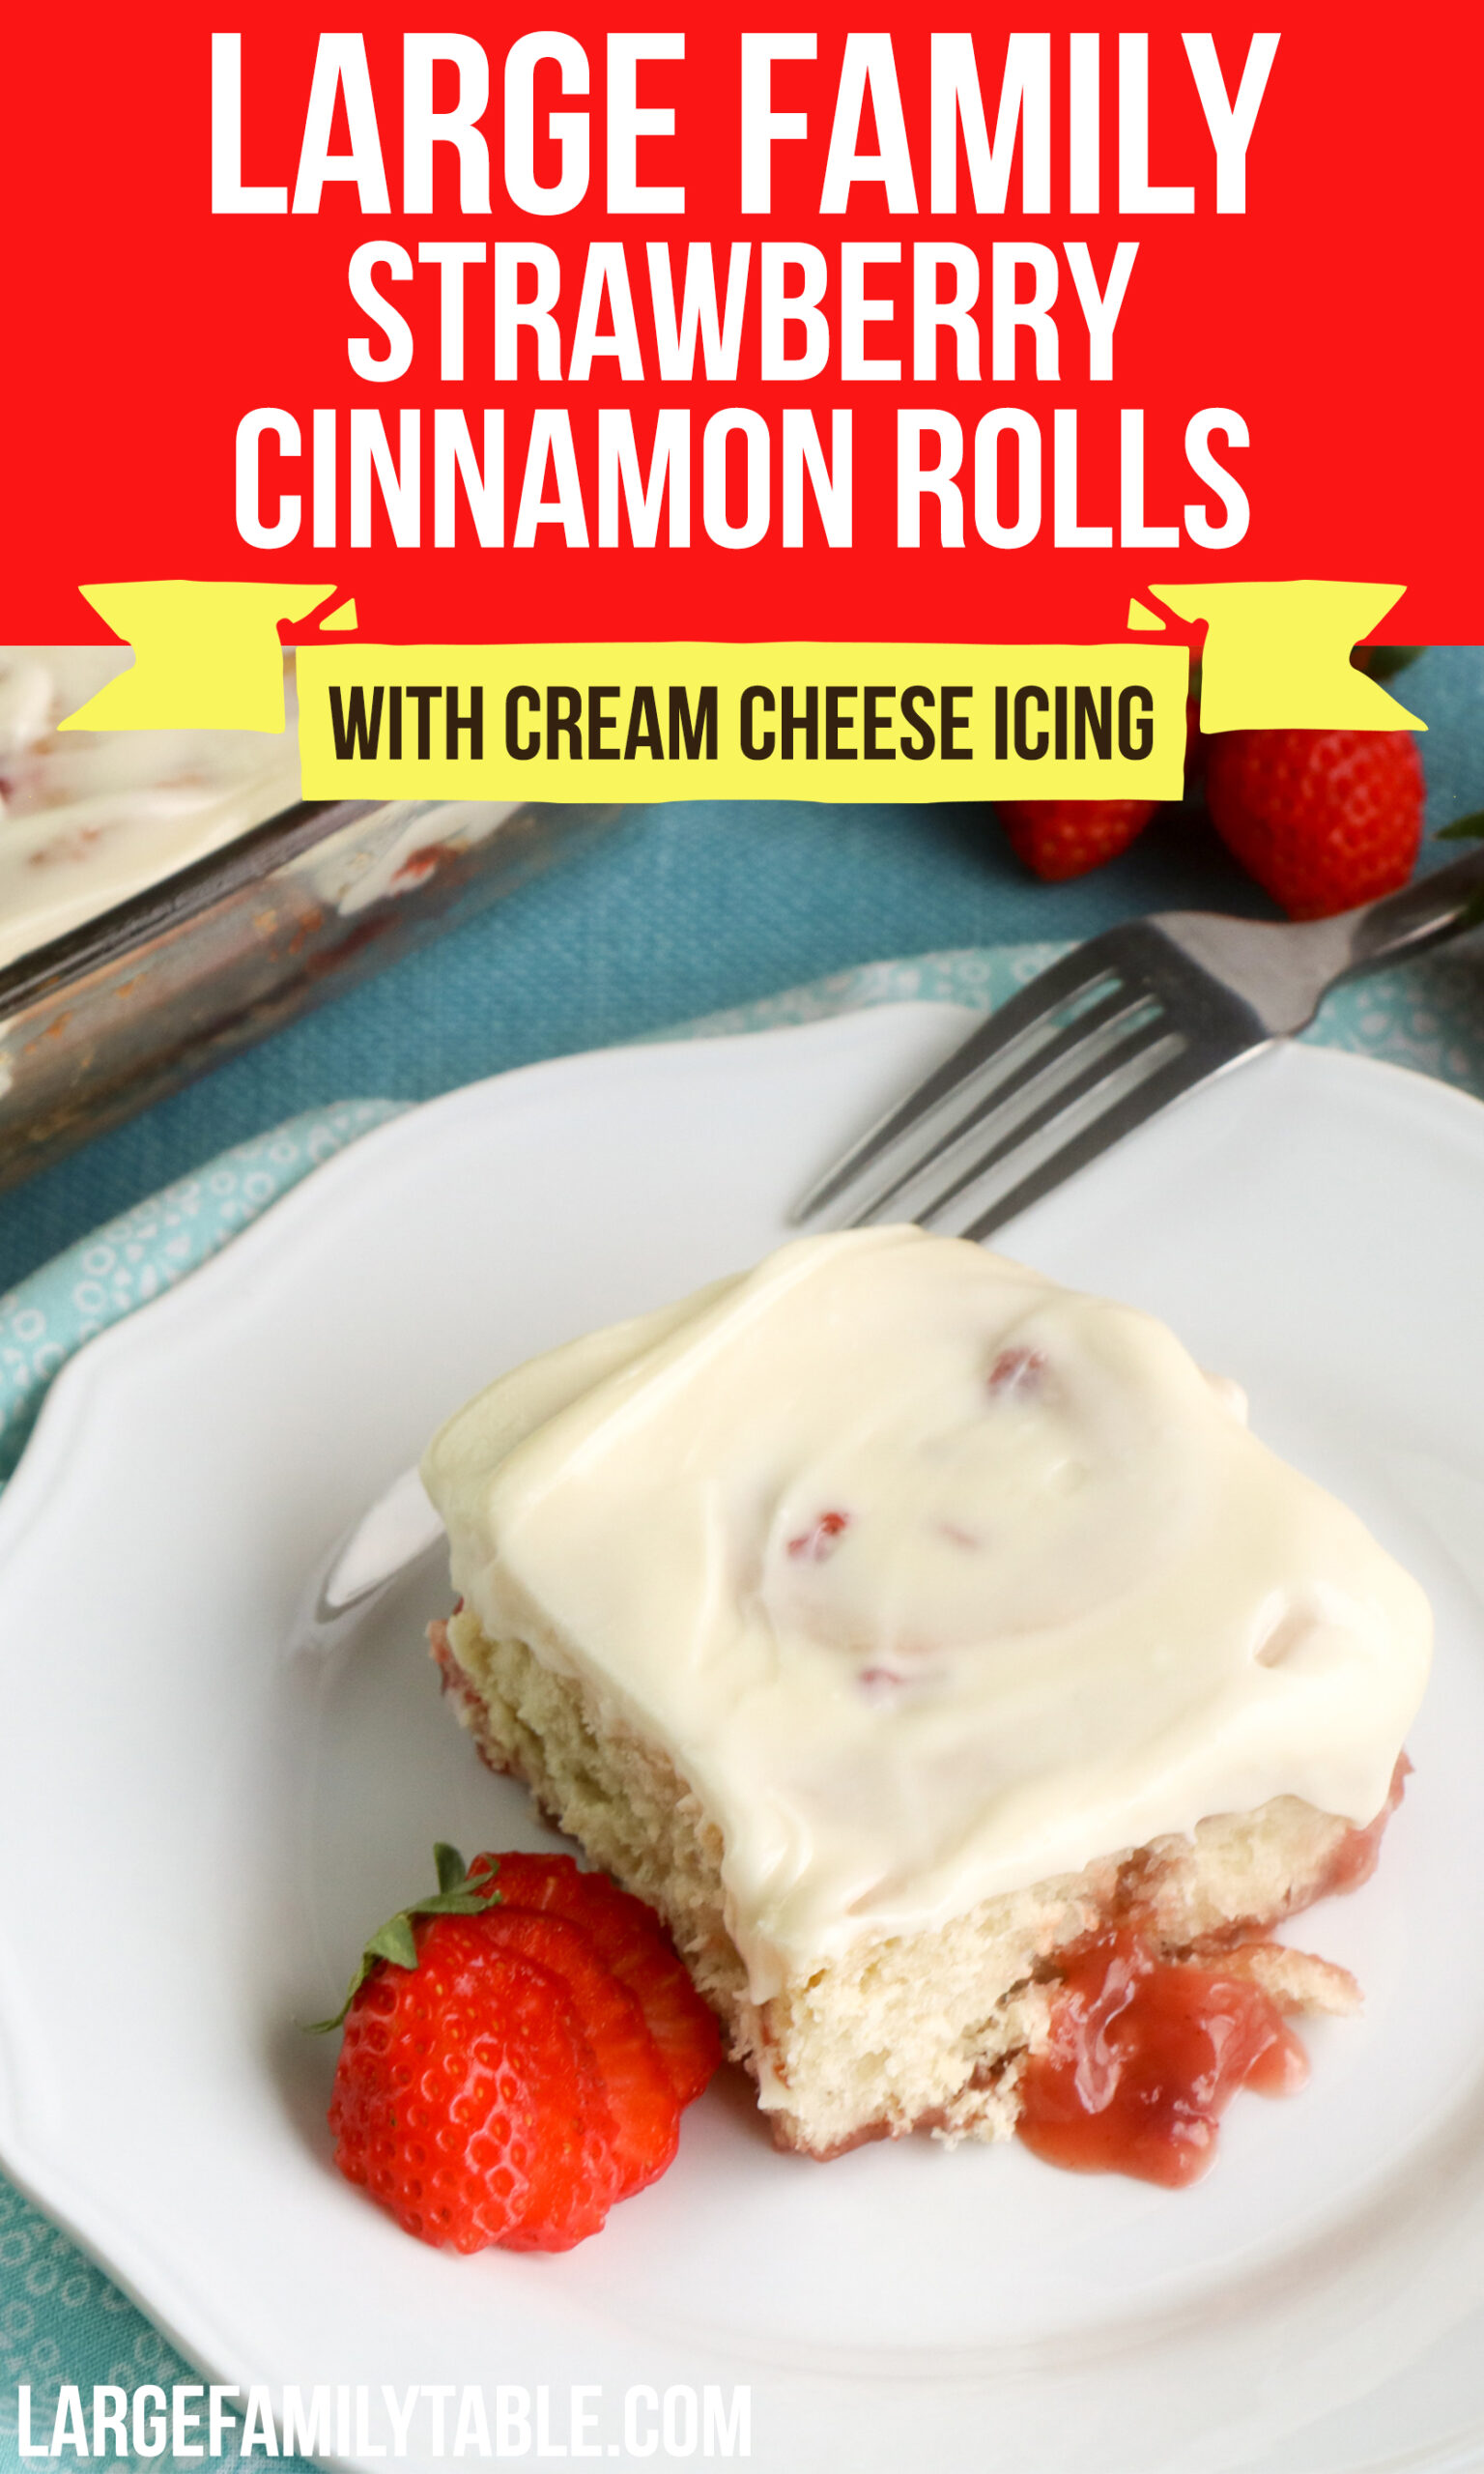 Strawberry Cinnamon Rolls with Cream Cheese Icing